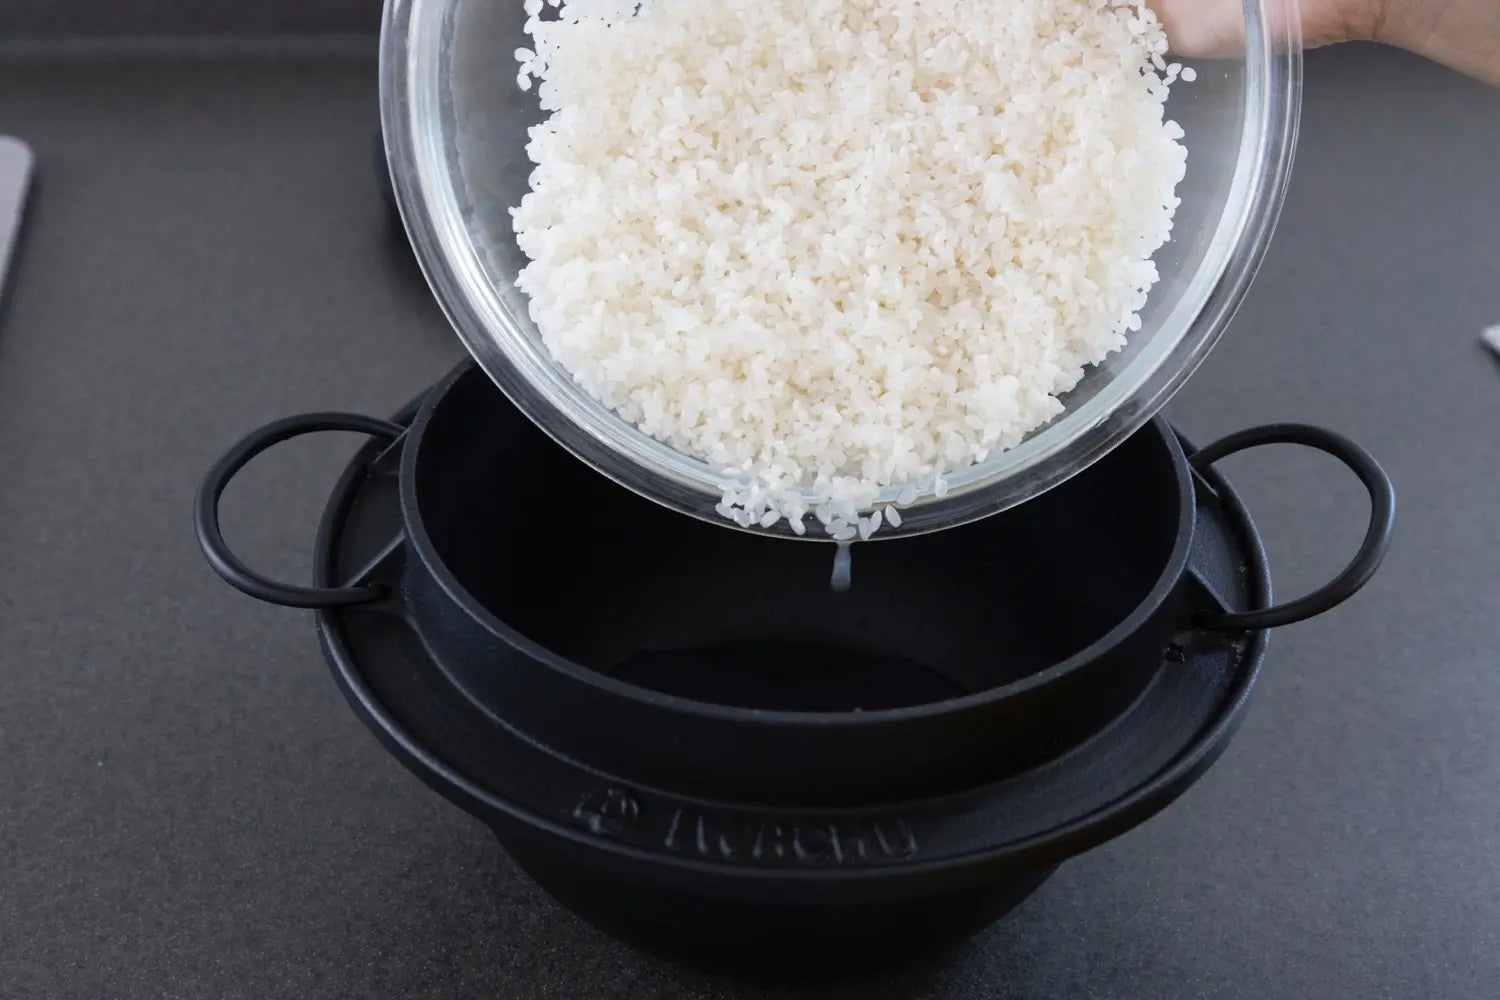 Pouring rice into the pot